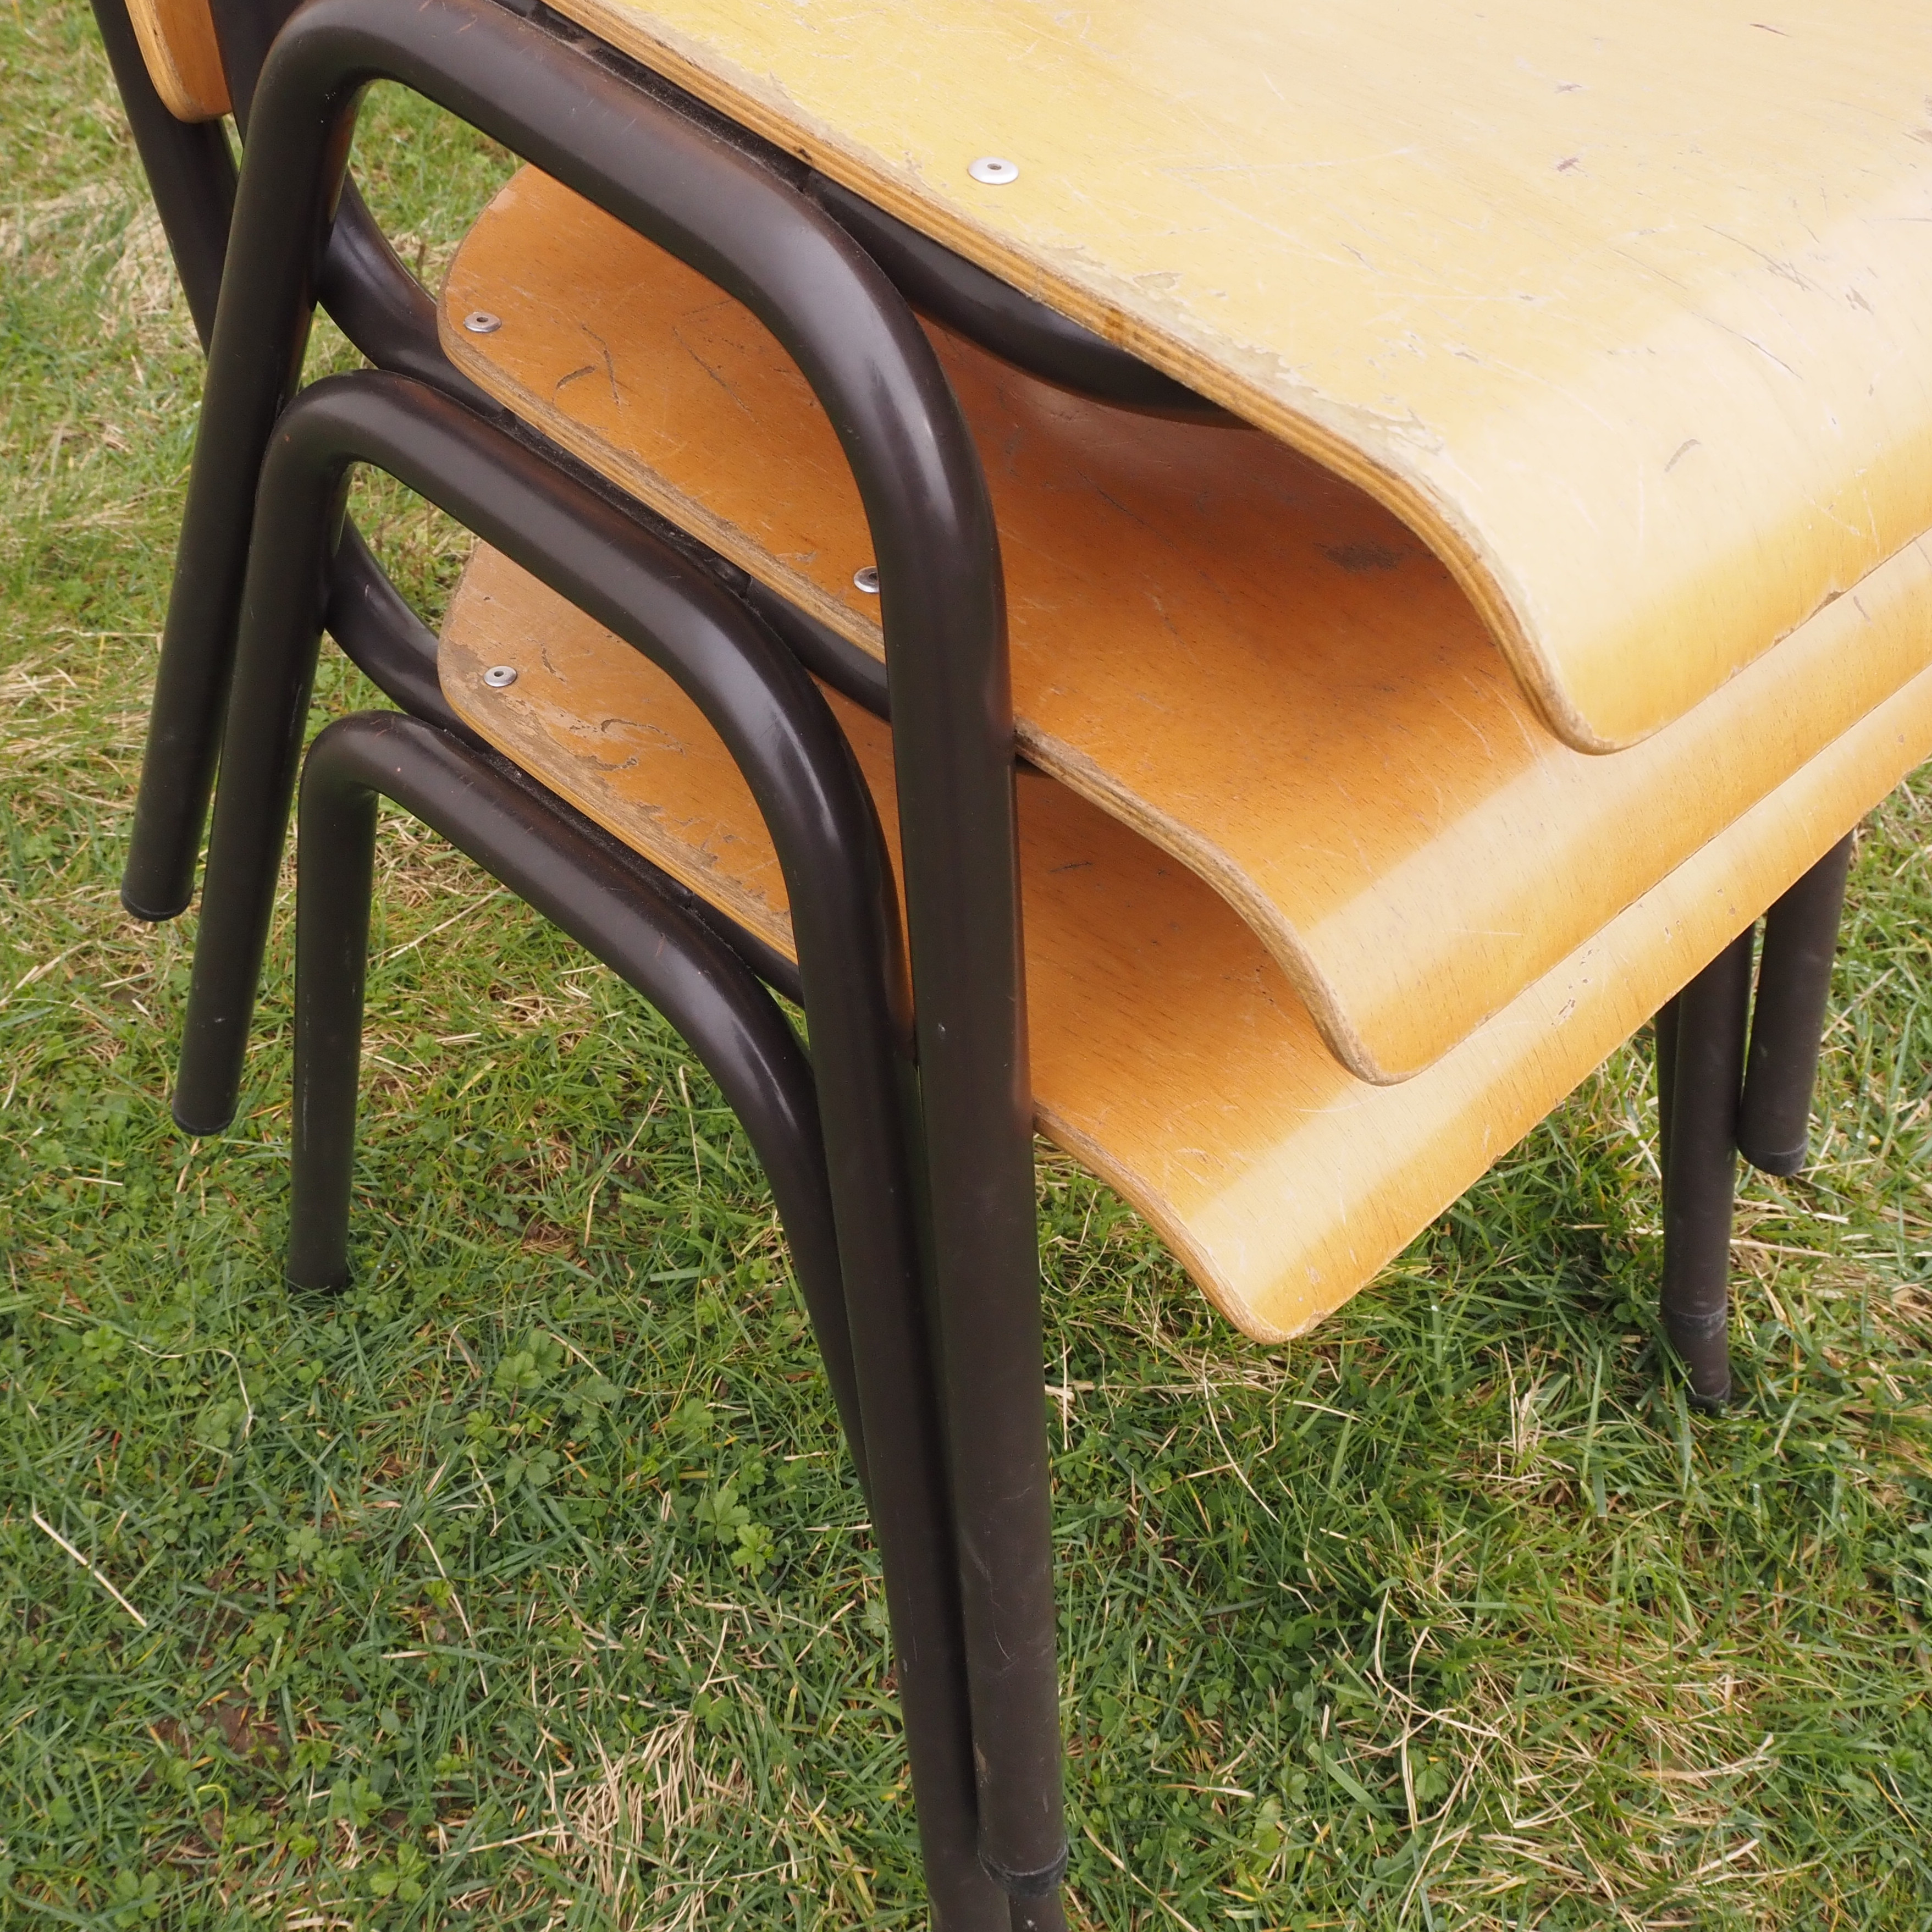 Stackable school chair in plywood and steel tube legs